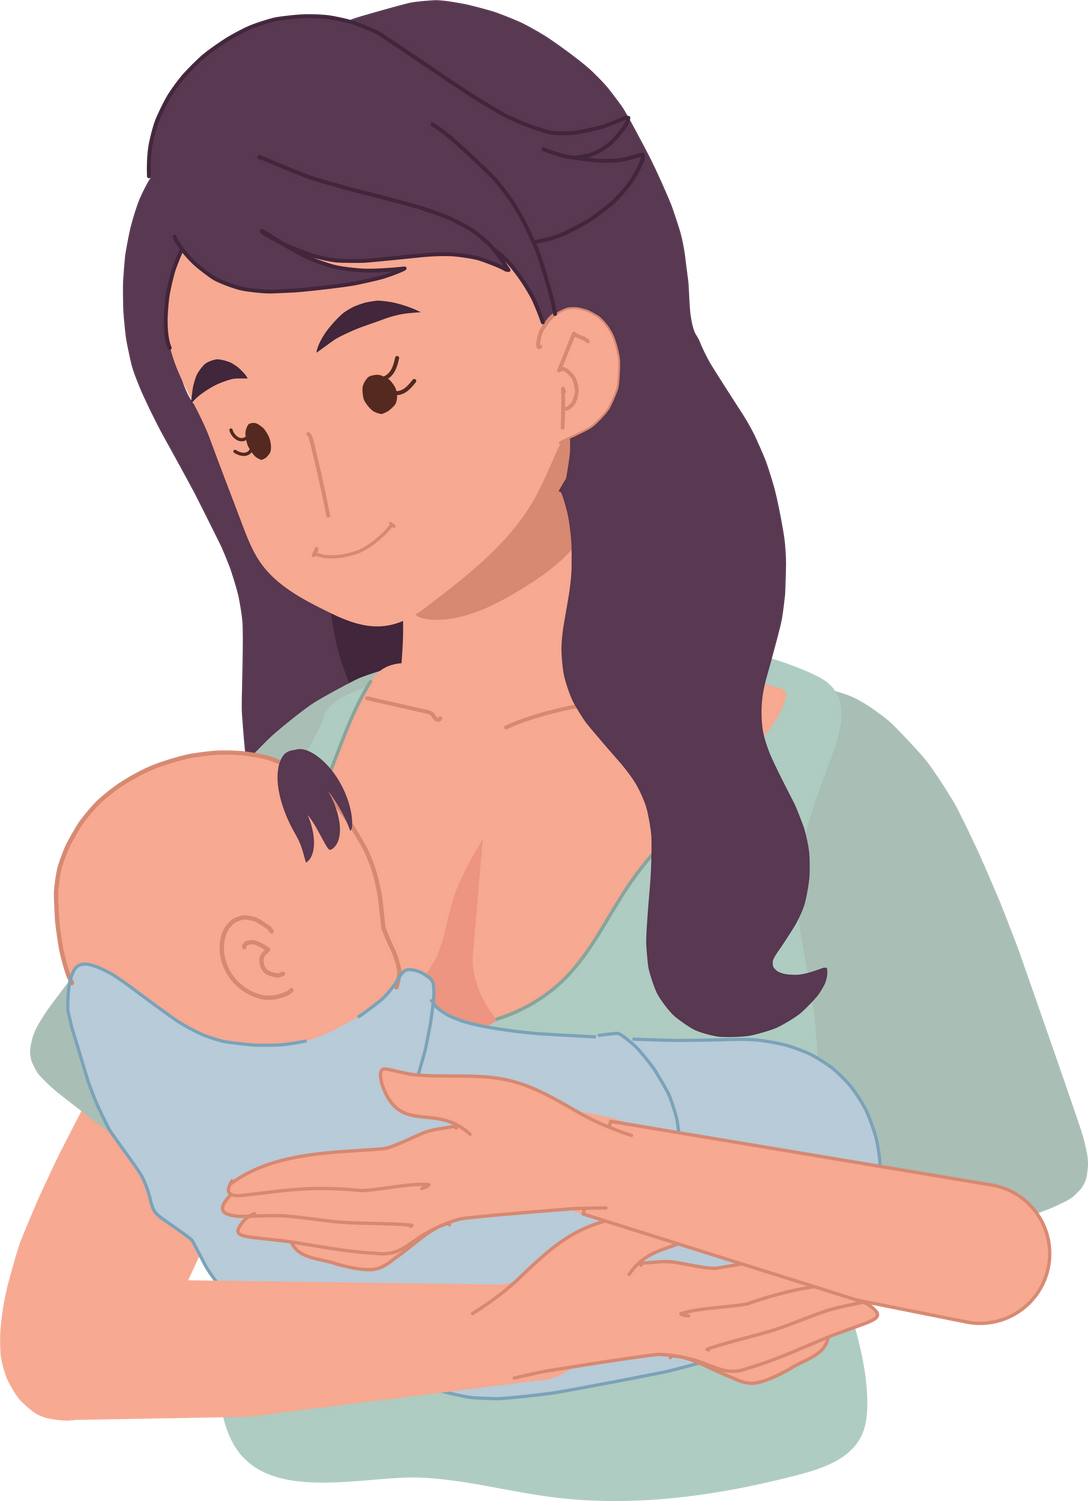 Breastfeeding cincept. Mom holds the baby in her arms and feeds with breast milk.